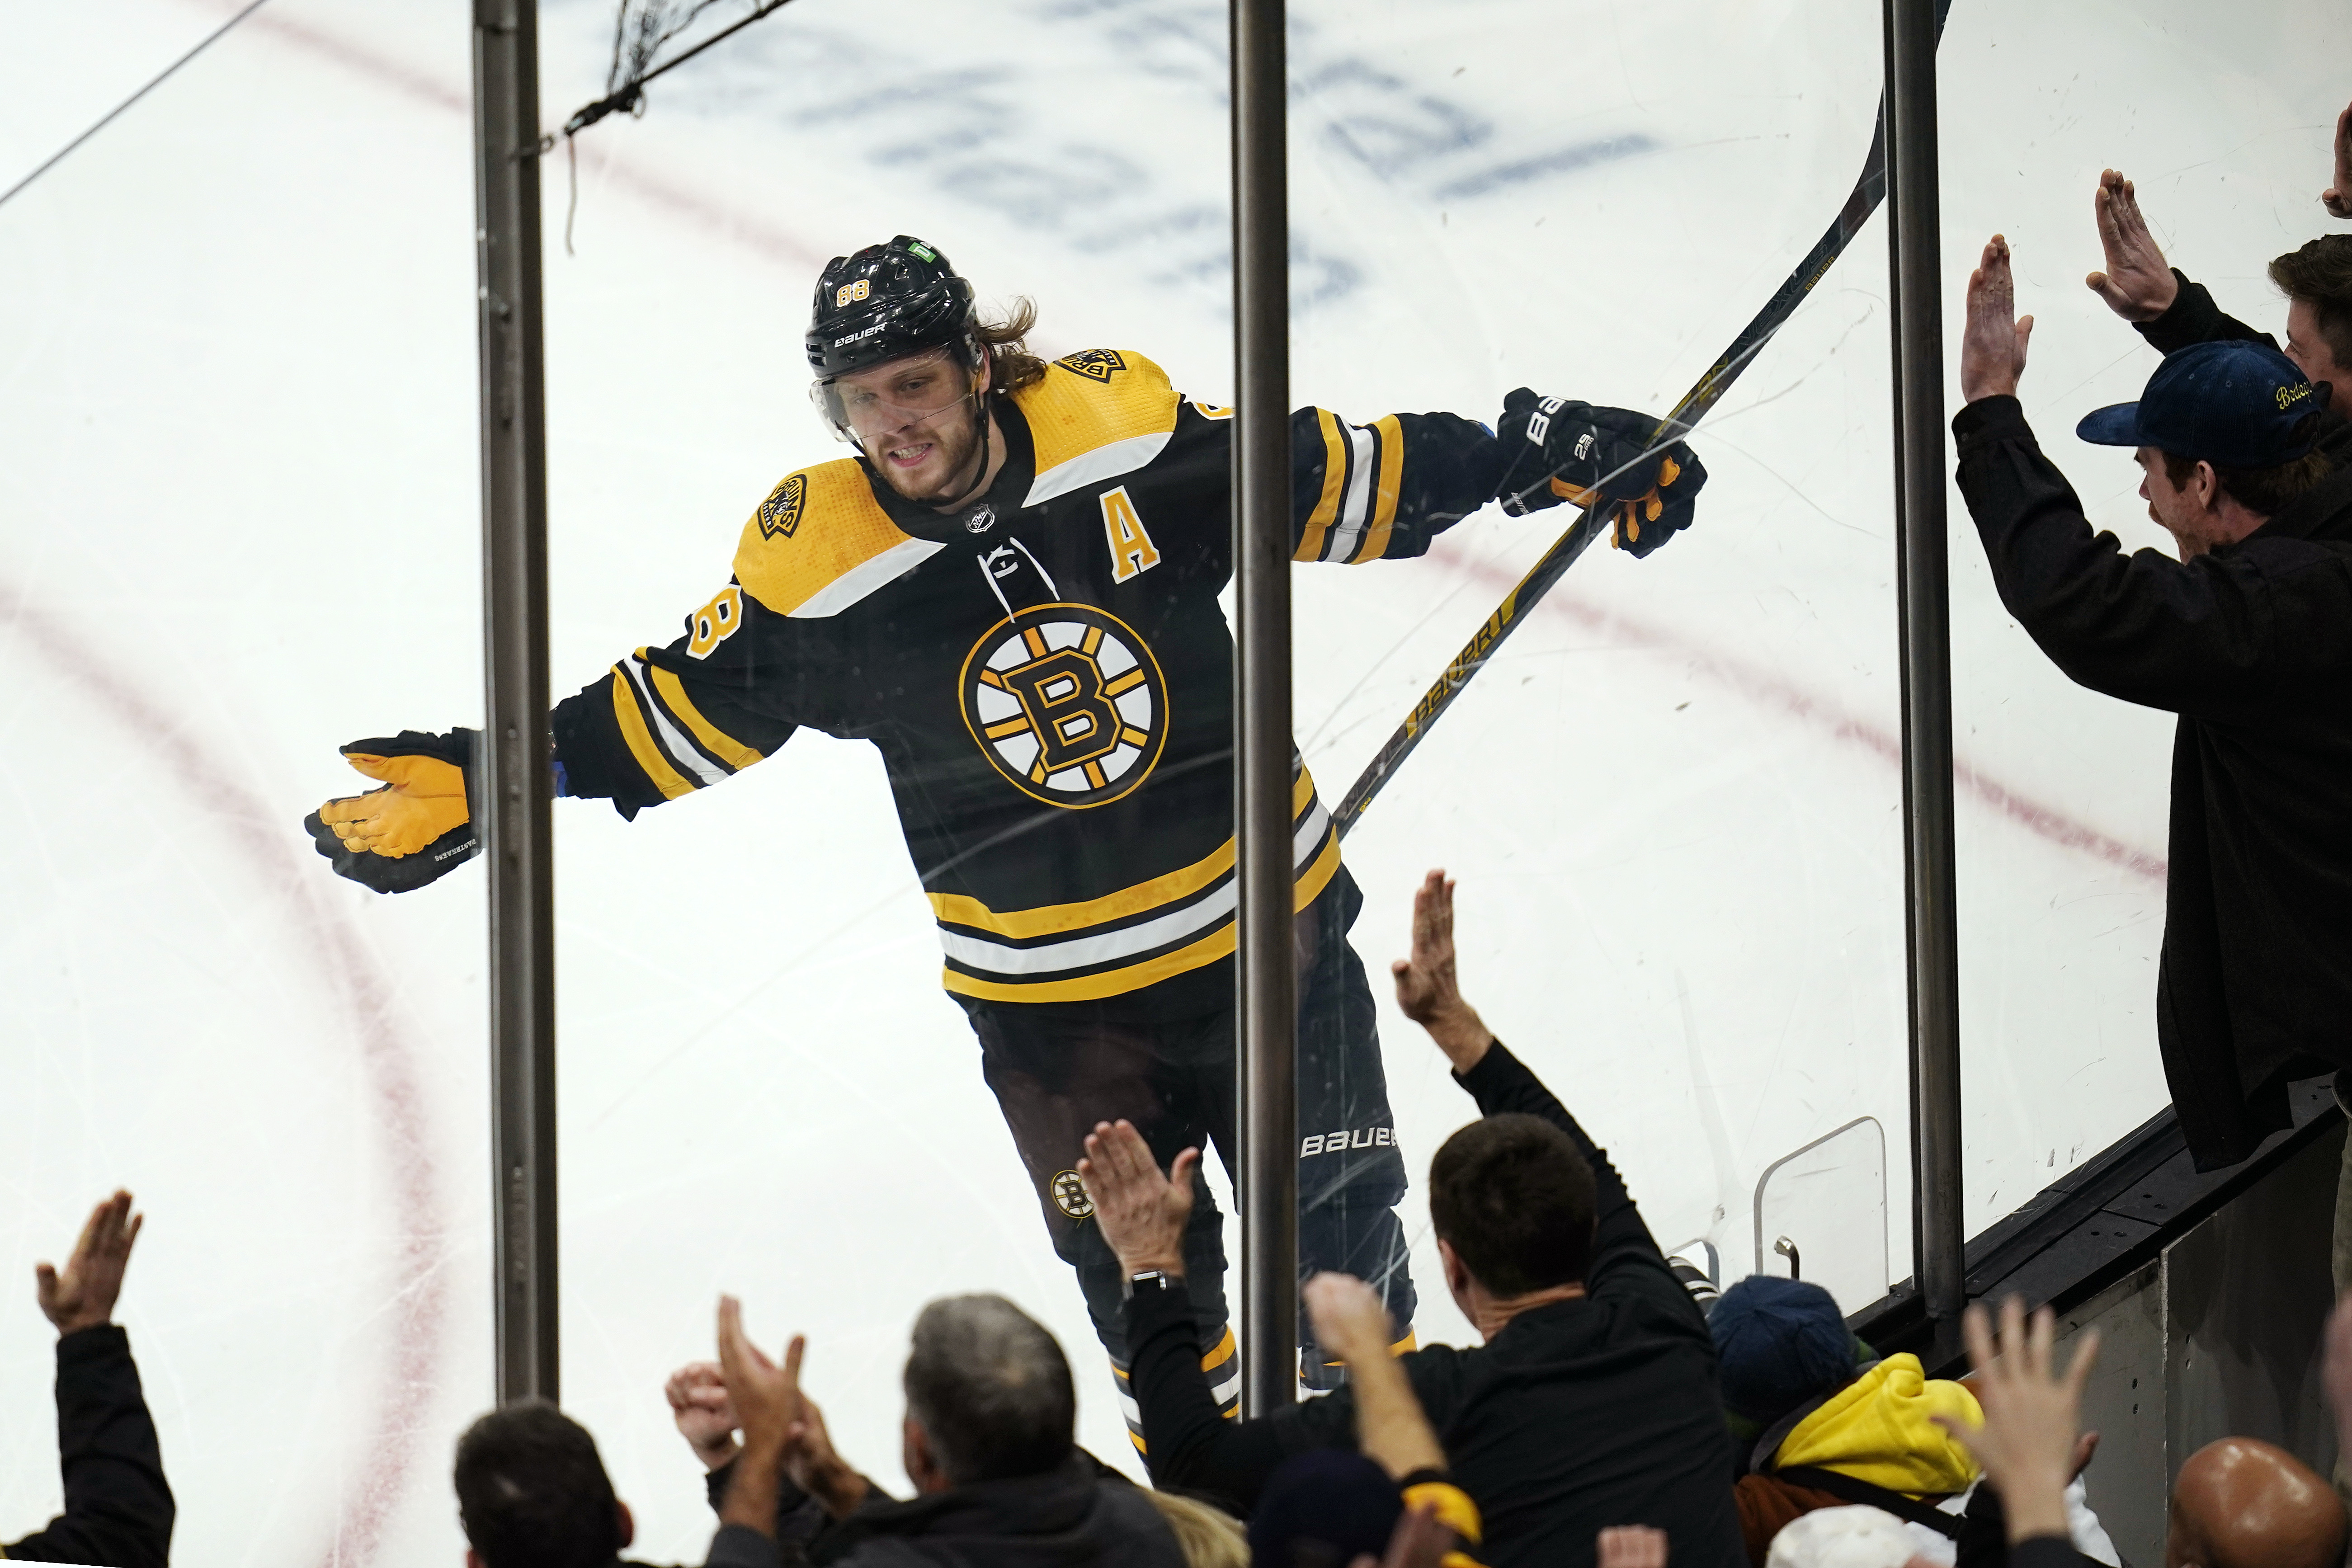 Bruins' David Pastrnak nearing a return, took practice contact for first  time on Monday